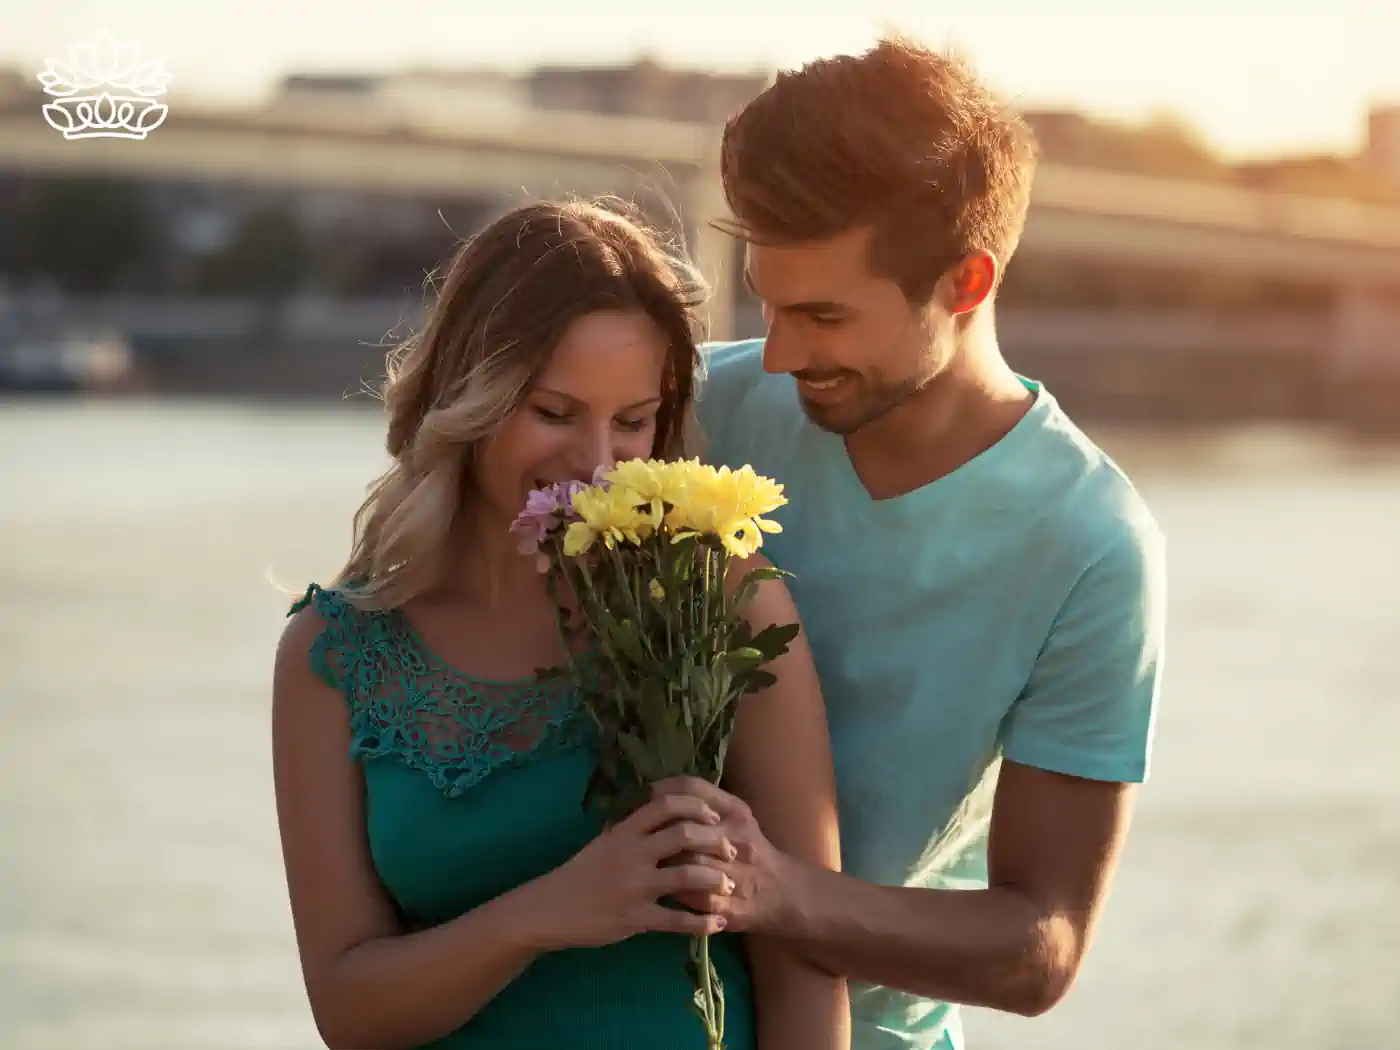 Image of a couple by the water, the man holding a flower bouquet while embracing the woman from behind. Fabulous Flowers and Gifts - Luxury Flower Bouquets.